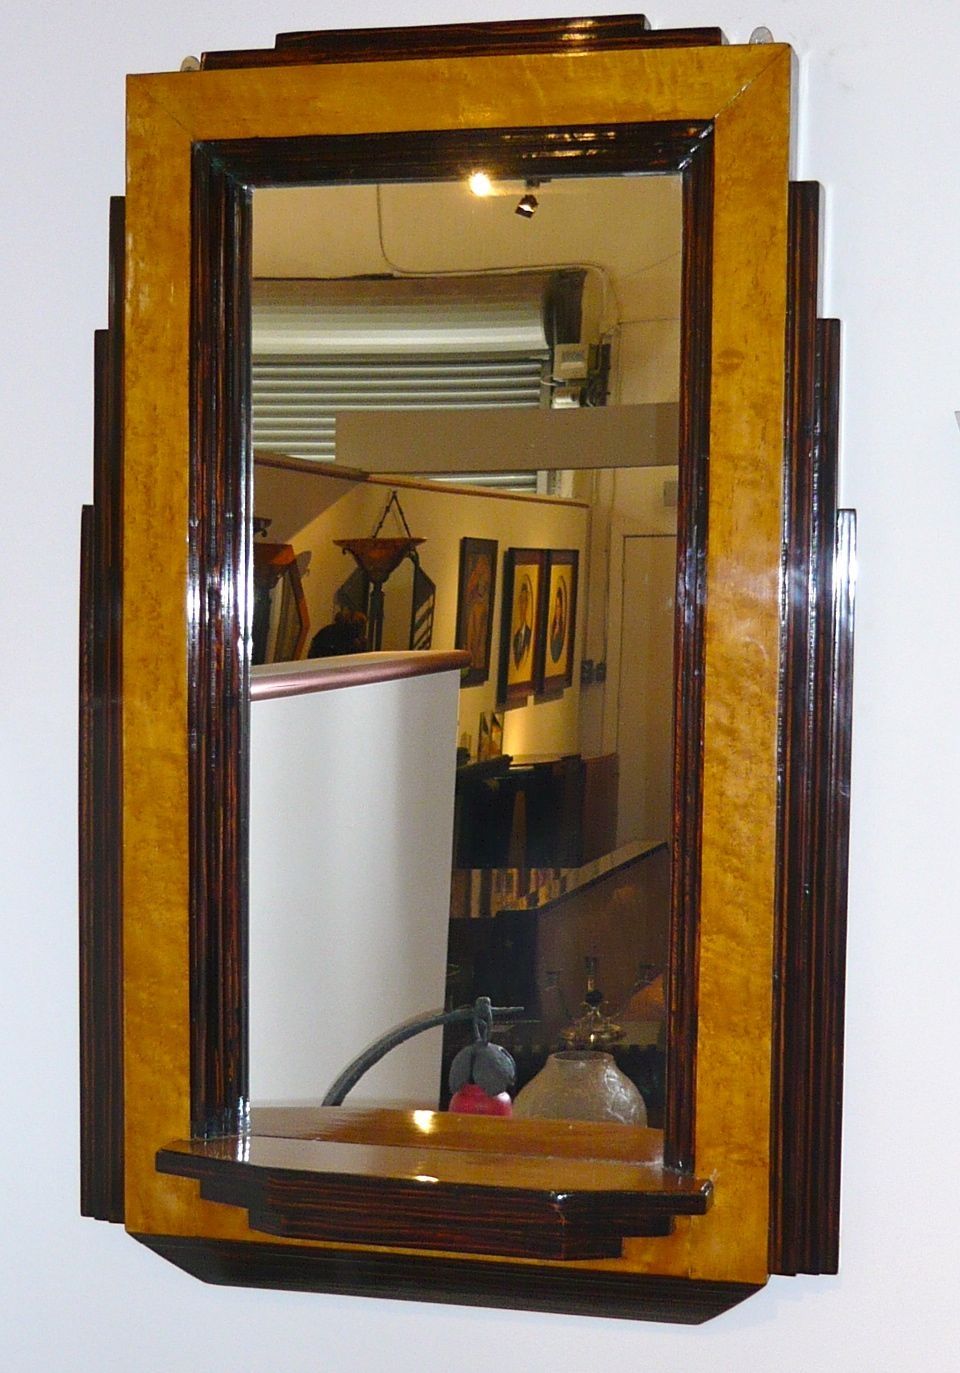 Art Deco Mirrors For Sale Art Deco Collection With Original Art Deco Mirrors (View 1 of 15)